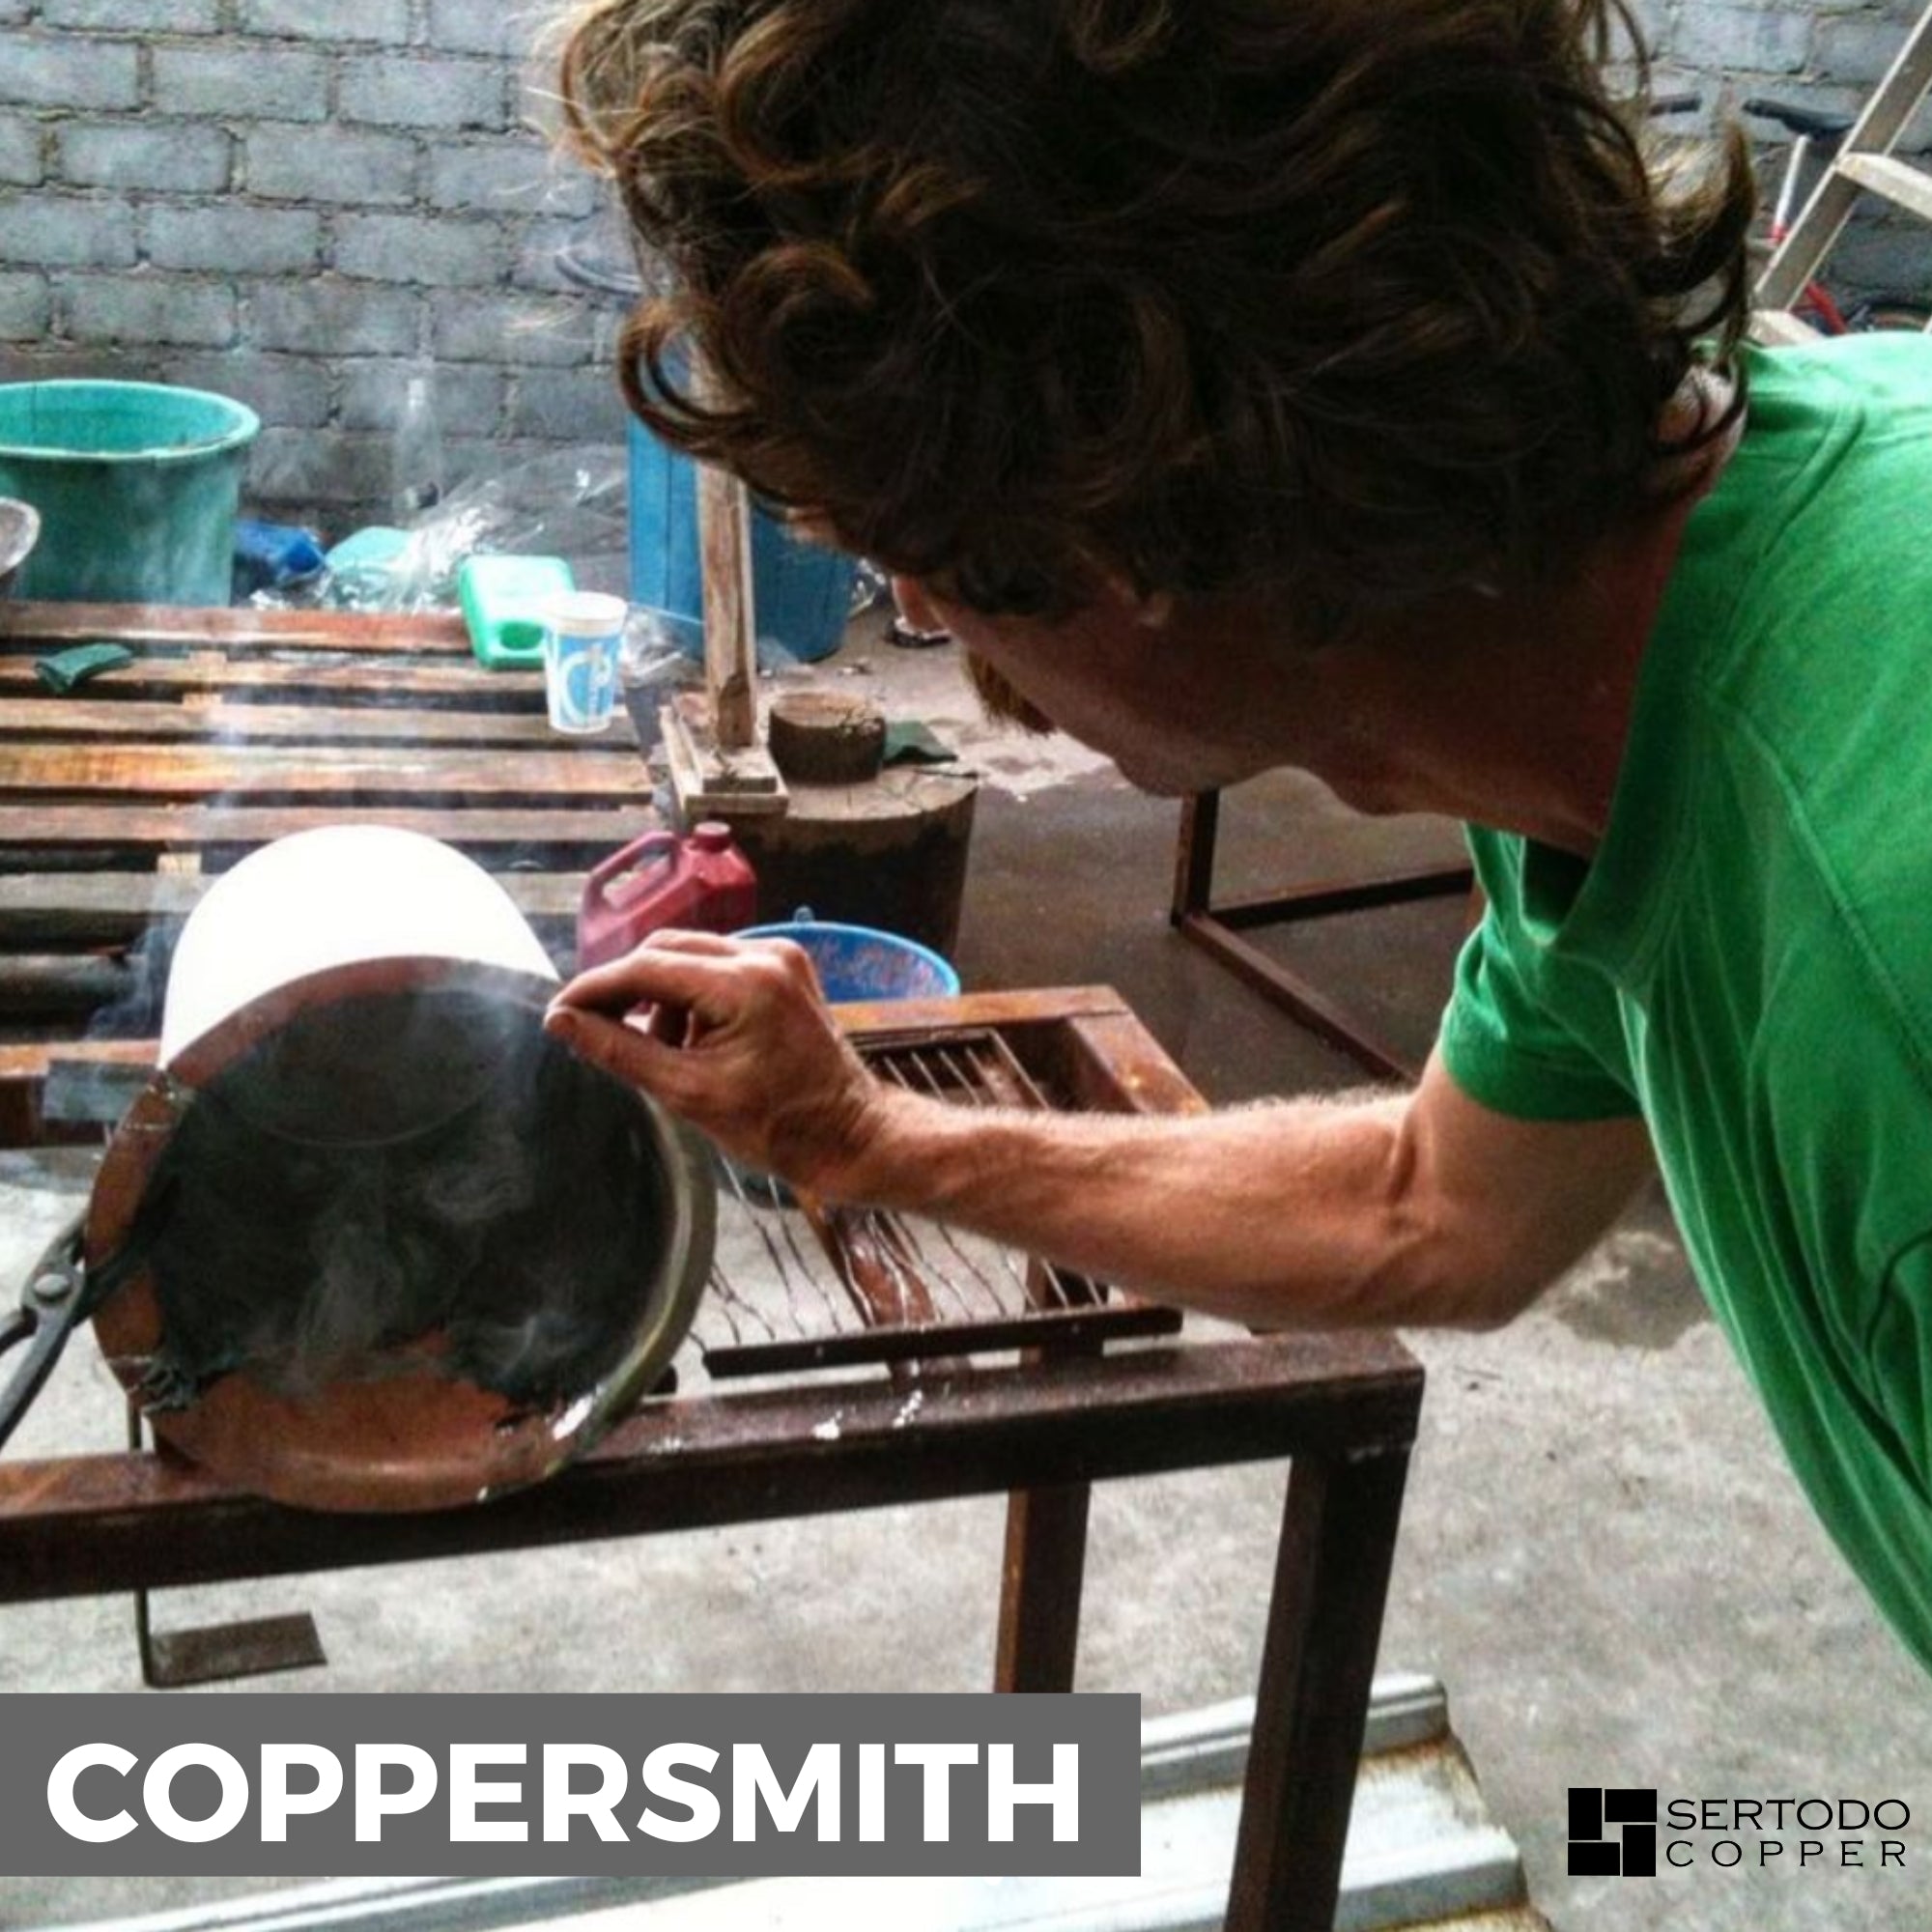 What's a Coppersmith?